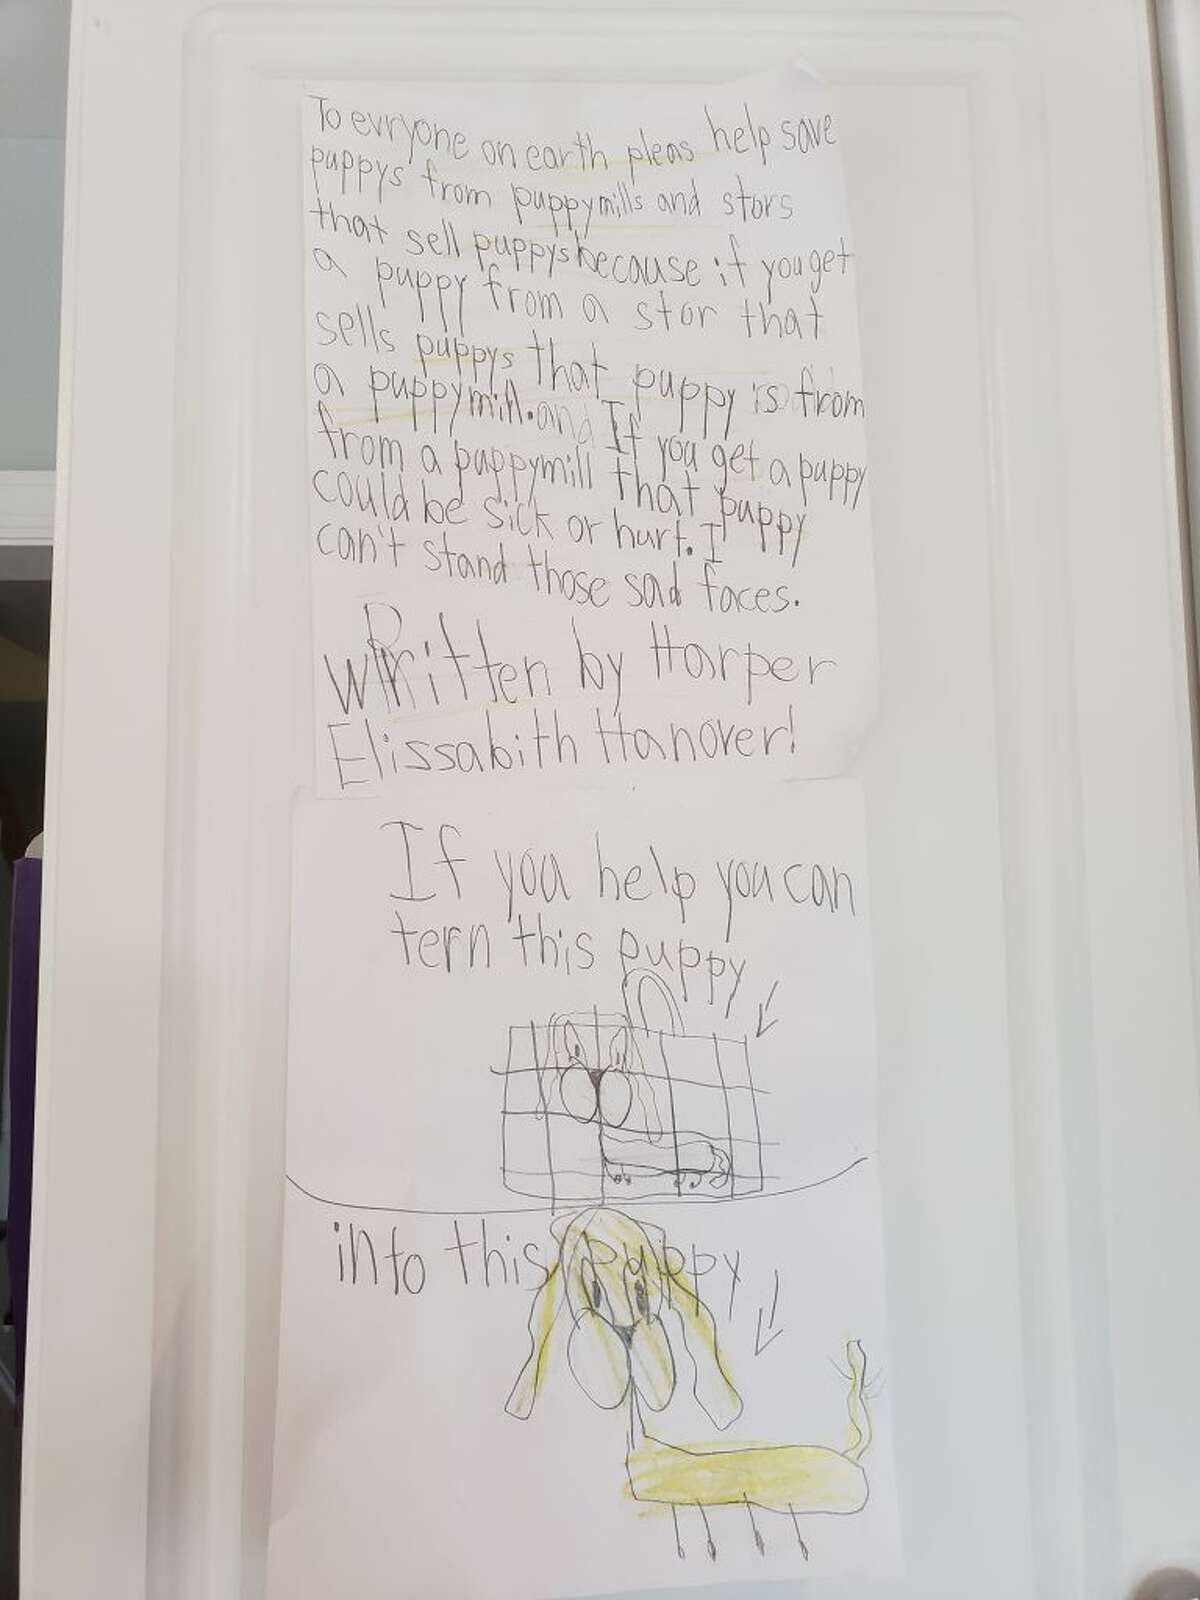 Harper Elizabeth Hanover penned this hand-written letter and submitted it to The Press.